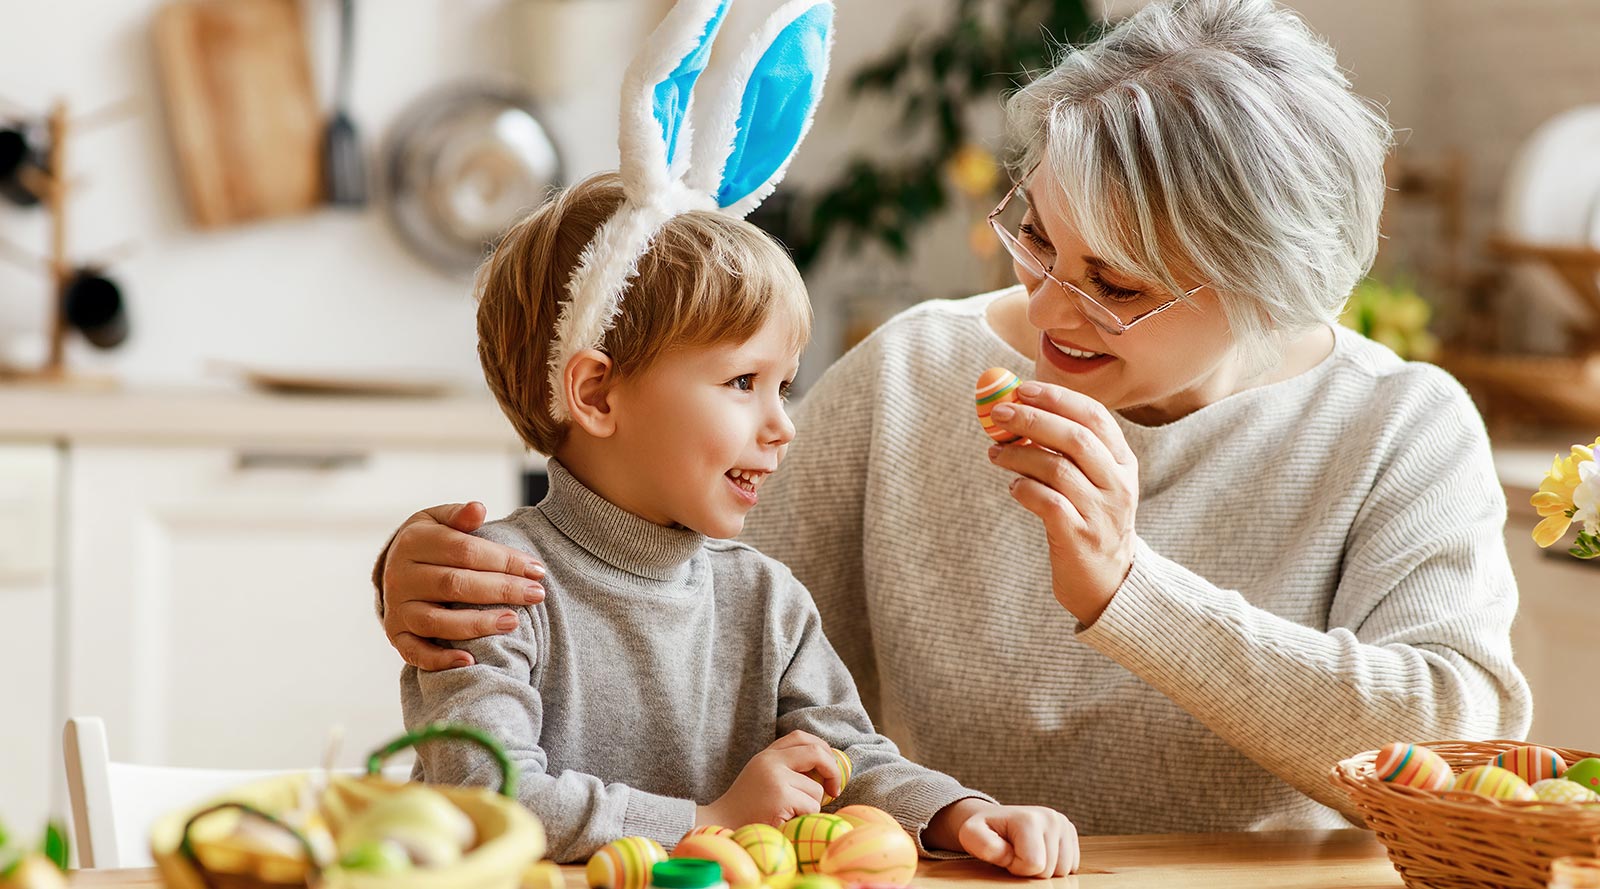 grandmother and child looking at an Easter egg